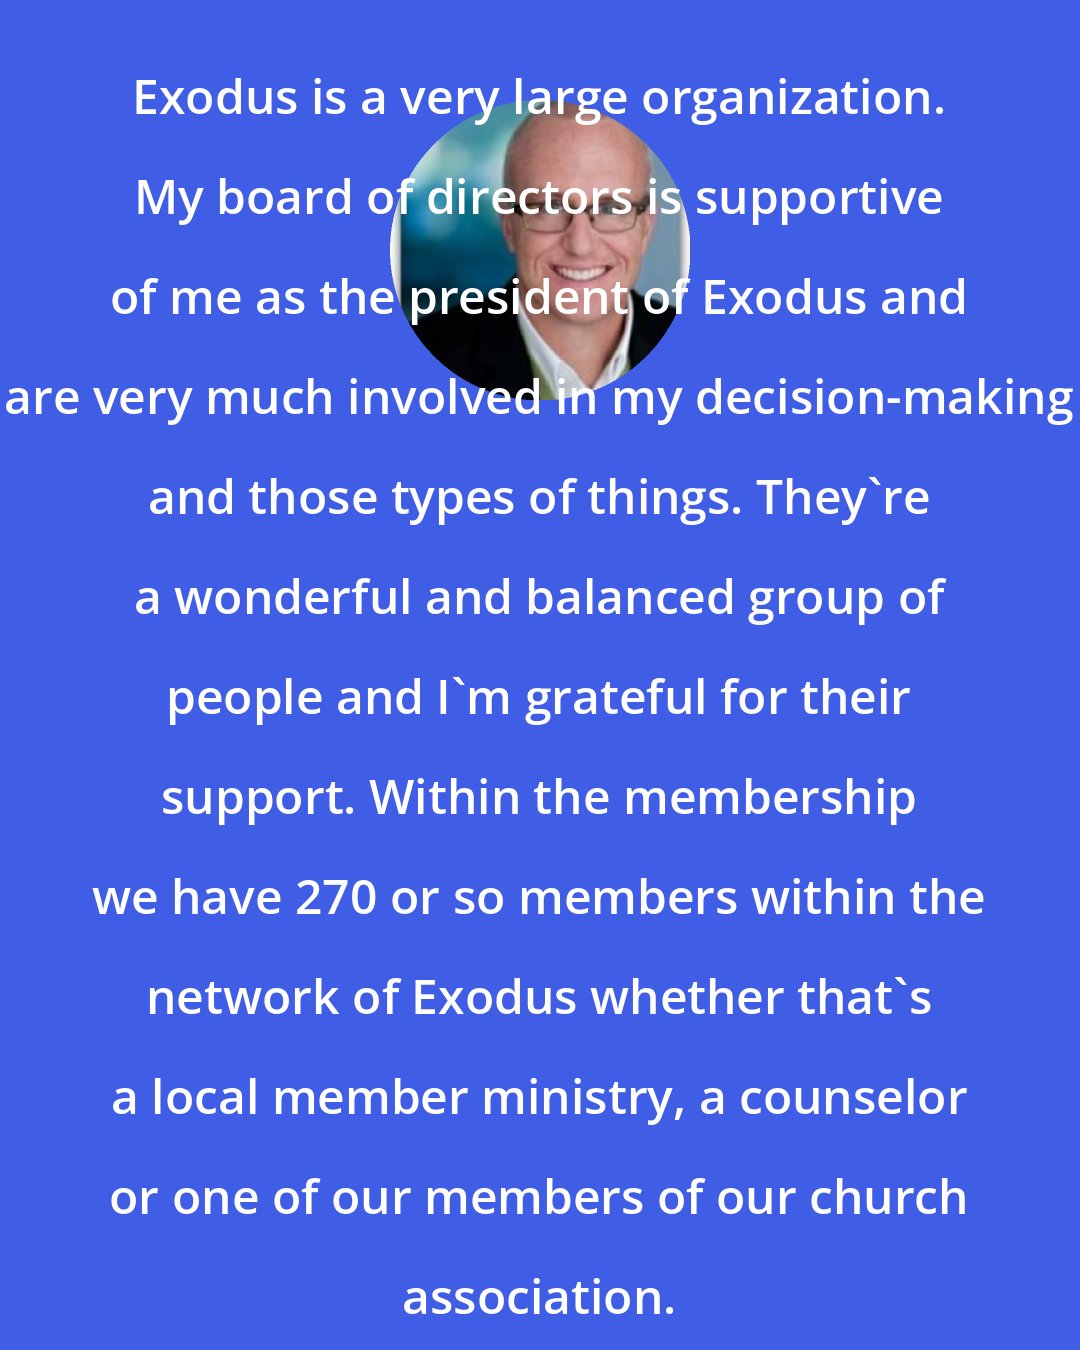 Alan Chambers: Exodus is a very large organization. My board of directors is supportive of me as the president of Exodus and are very much involved in my decision-making and those types of things. They're a wonderful and balanced group of people and I'm grateful for their support. Within the membership we have 270 or so members within the network of Exodus whether that's a local member ministry, a counselor or one of our members of our church association.